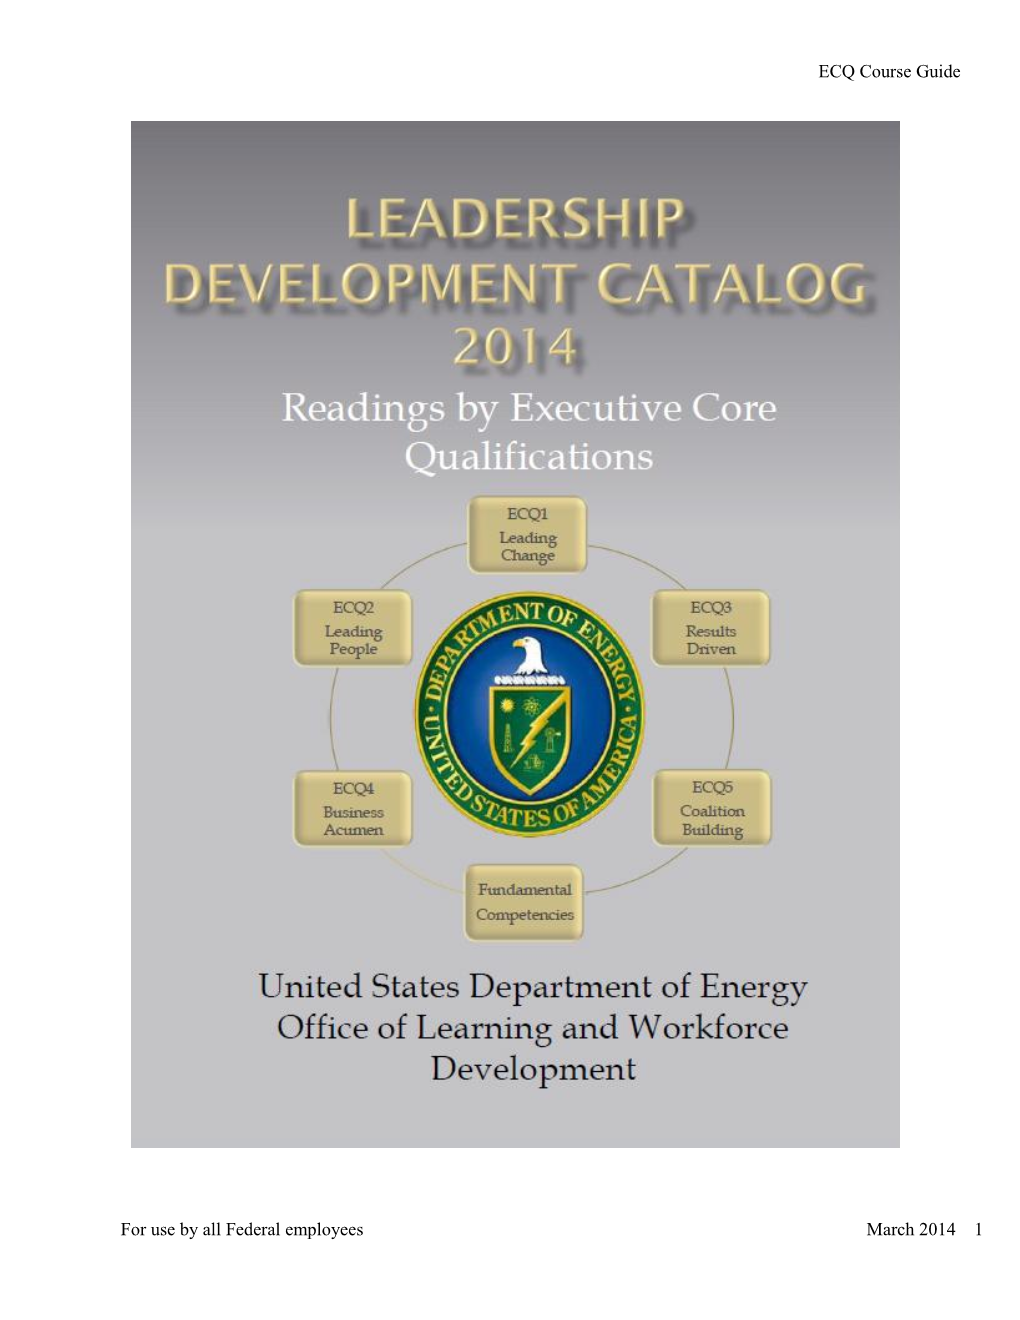 ECQ Course Guide for Use by All Federal Employees March 2014 1